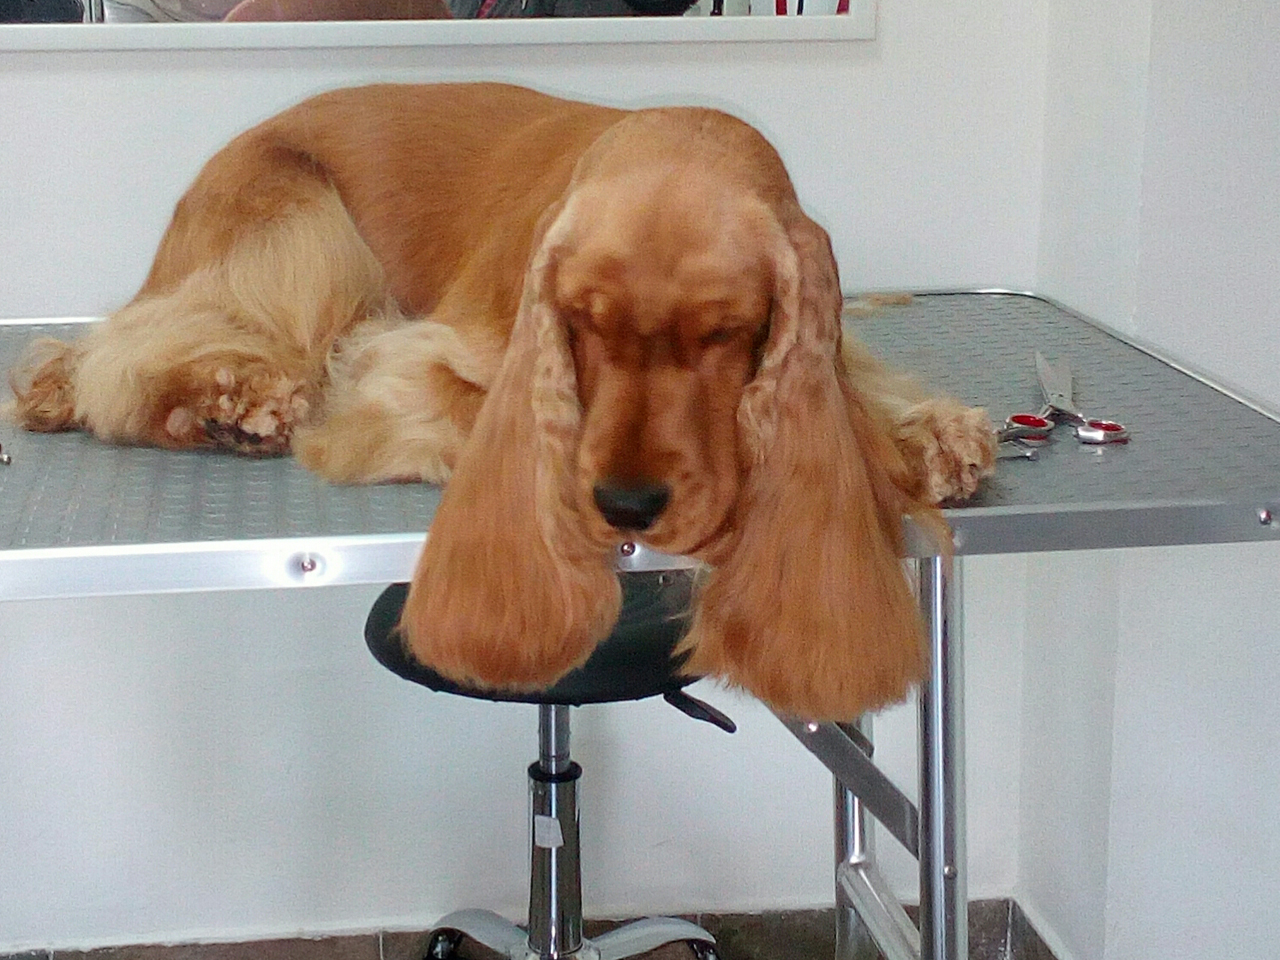 Photo 4 - 01 KUCA I MACA GROOMING SALON FOR DOGS AND CATS AND EDUCATION Pet salon, dog grooming Belgrade